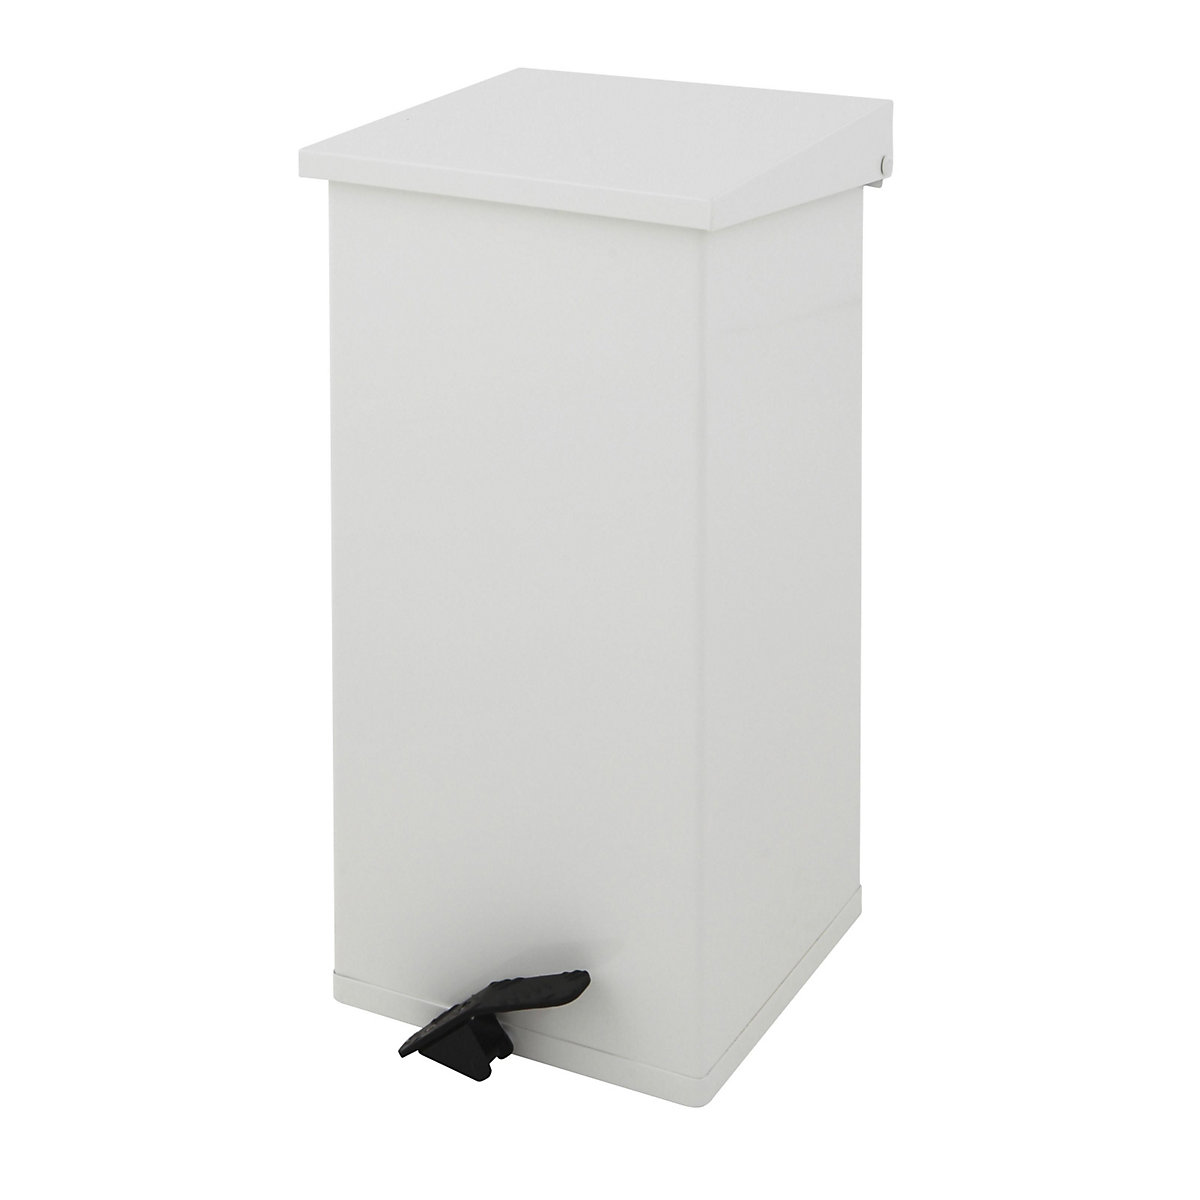 Waste collector with pedal, capacity 55 l, WxHxD 300 x 600 x 300 mm, white-3